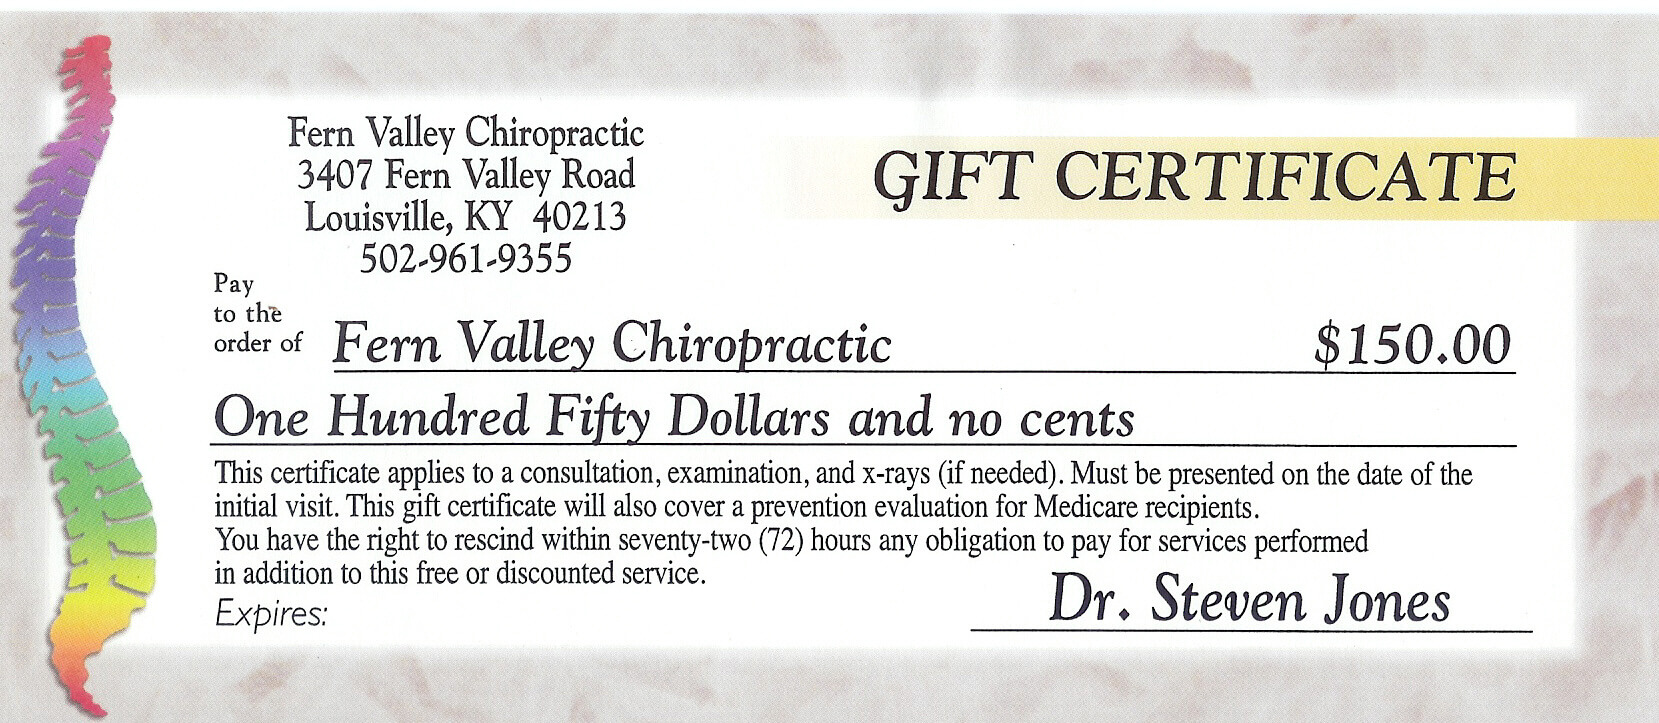 Certificate Templates: Chiropractic Gift Certificate Intended For Chiropractic Travel Card Template